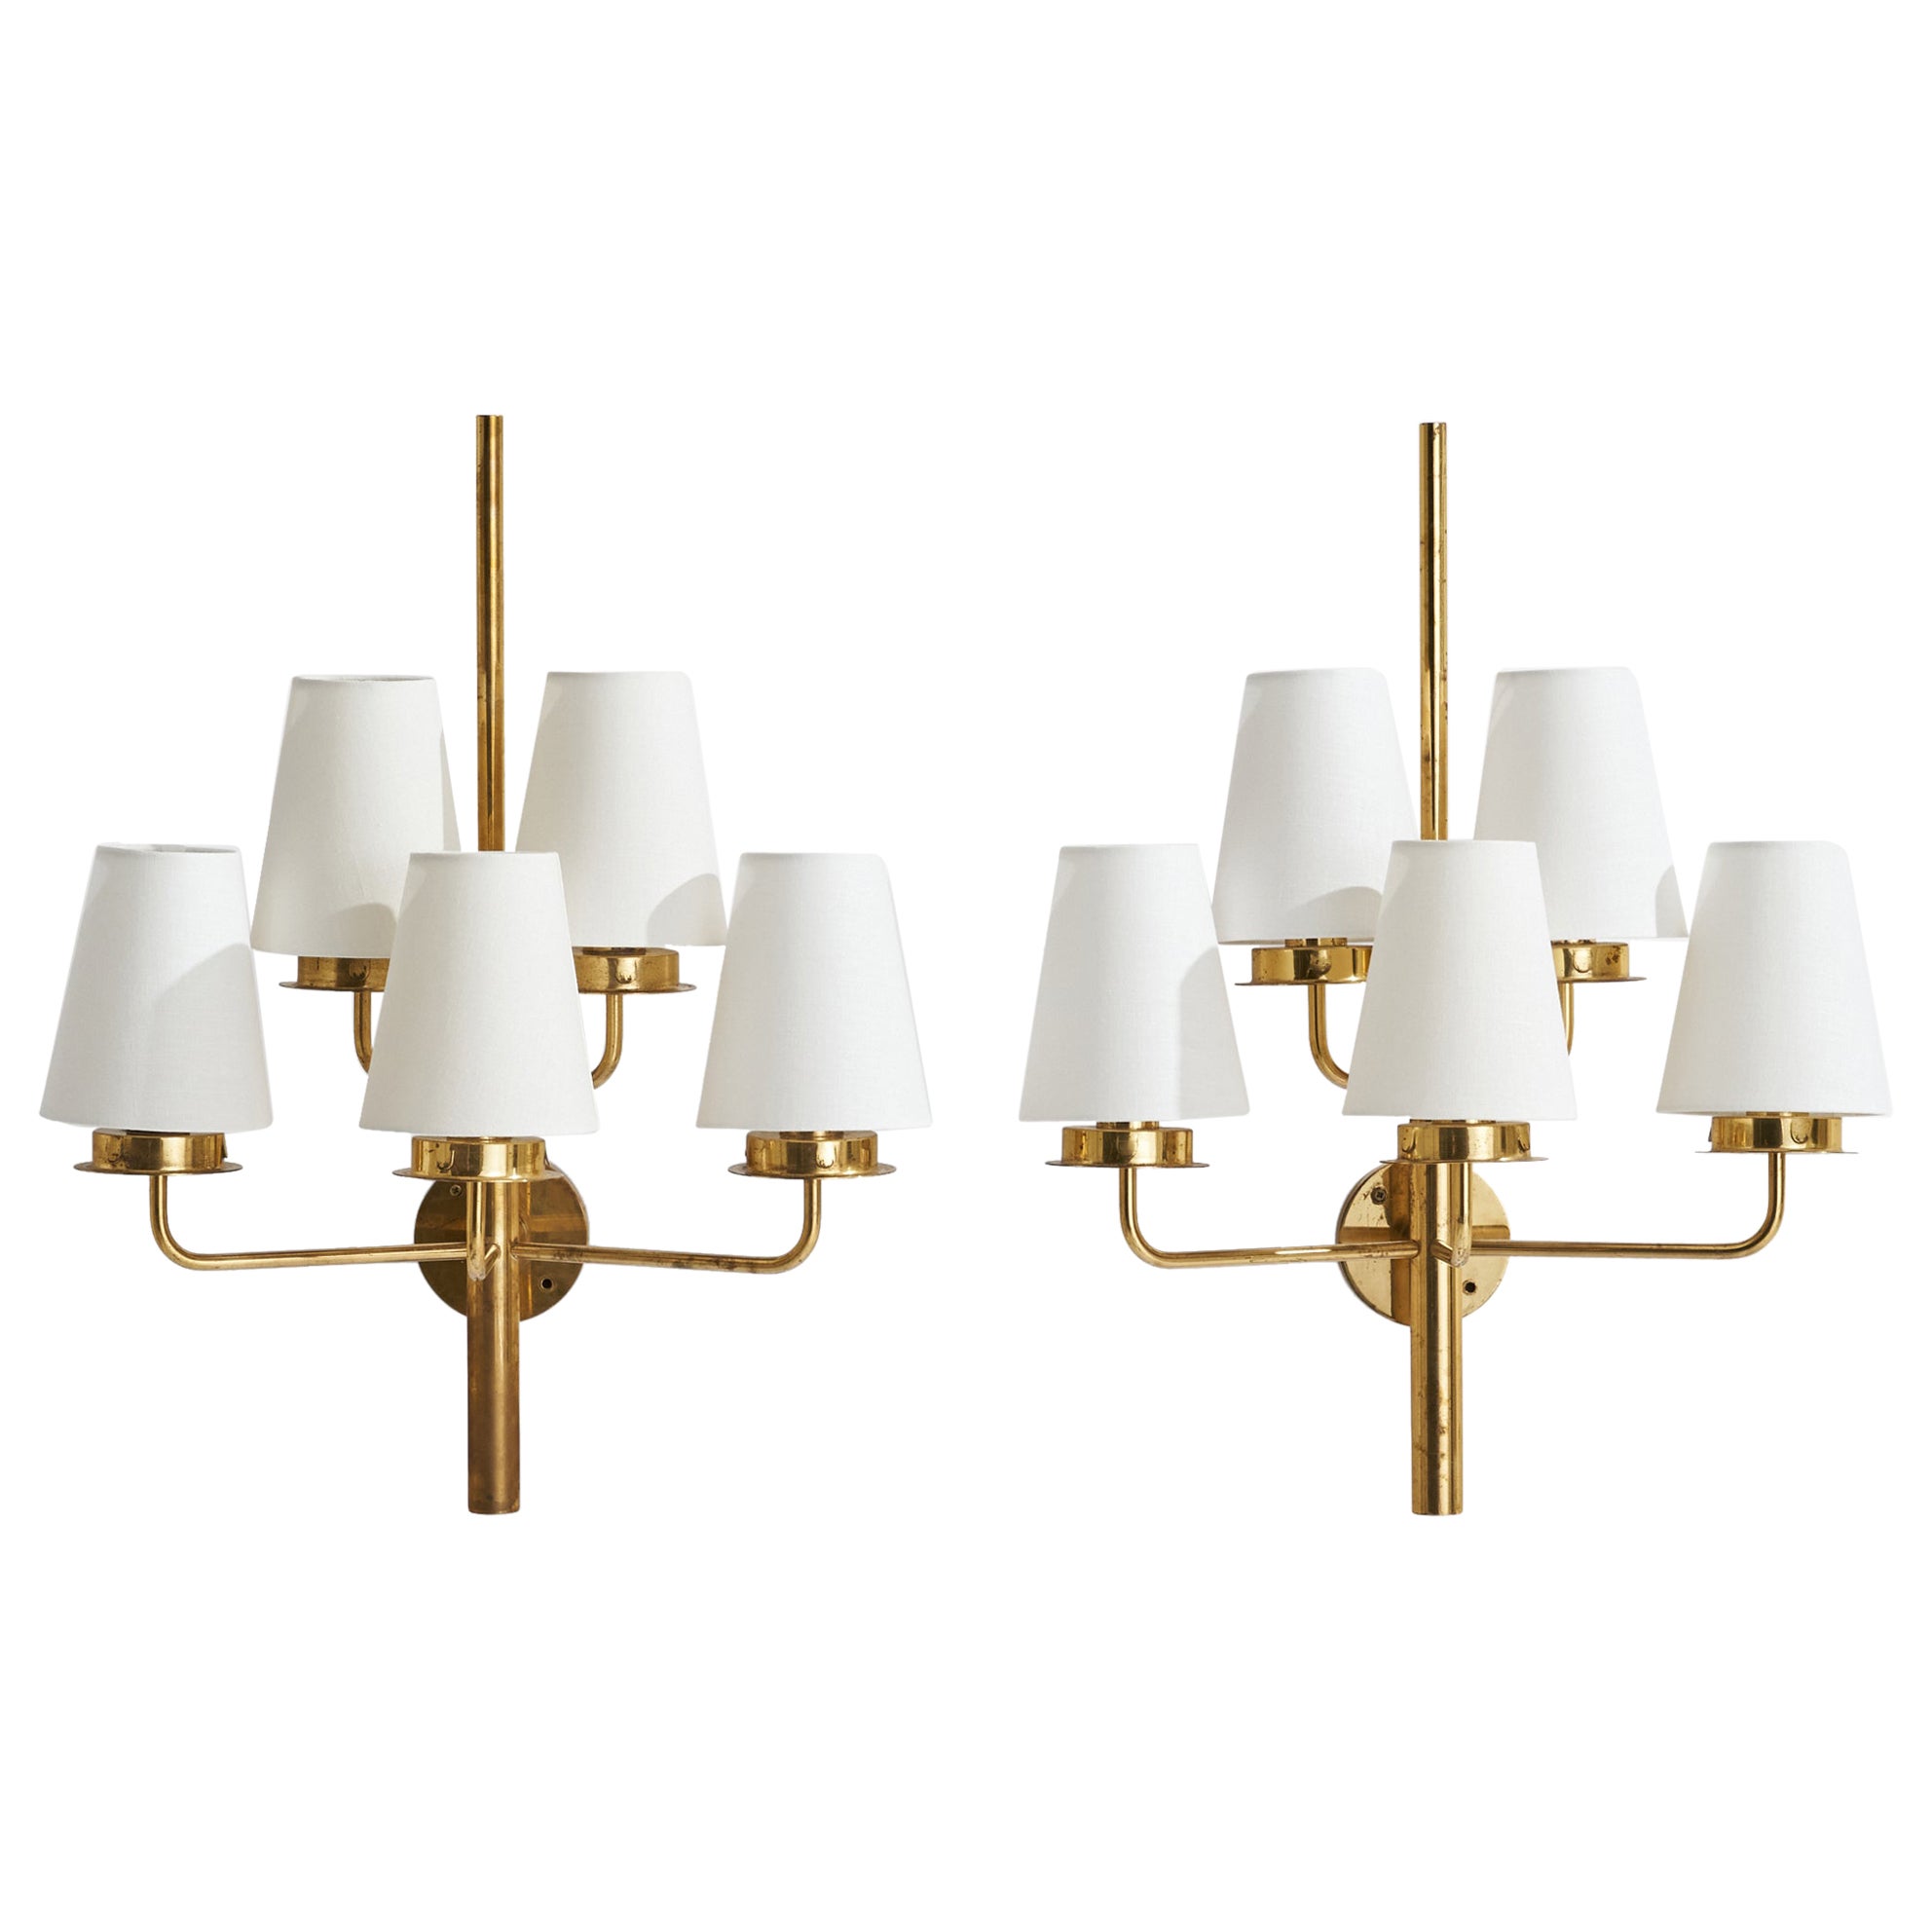 Hans-Agne Jakobsson, Sizeable Wall Lights, Brass, Fabric, Sweden, 1960s For Sale